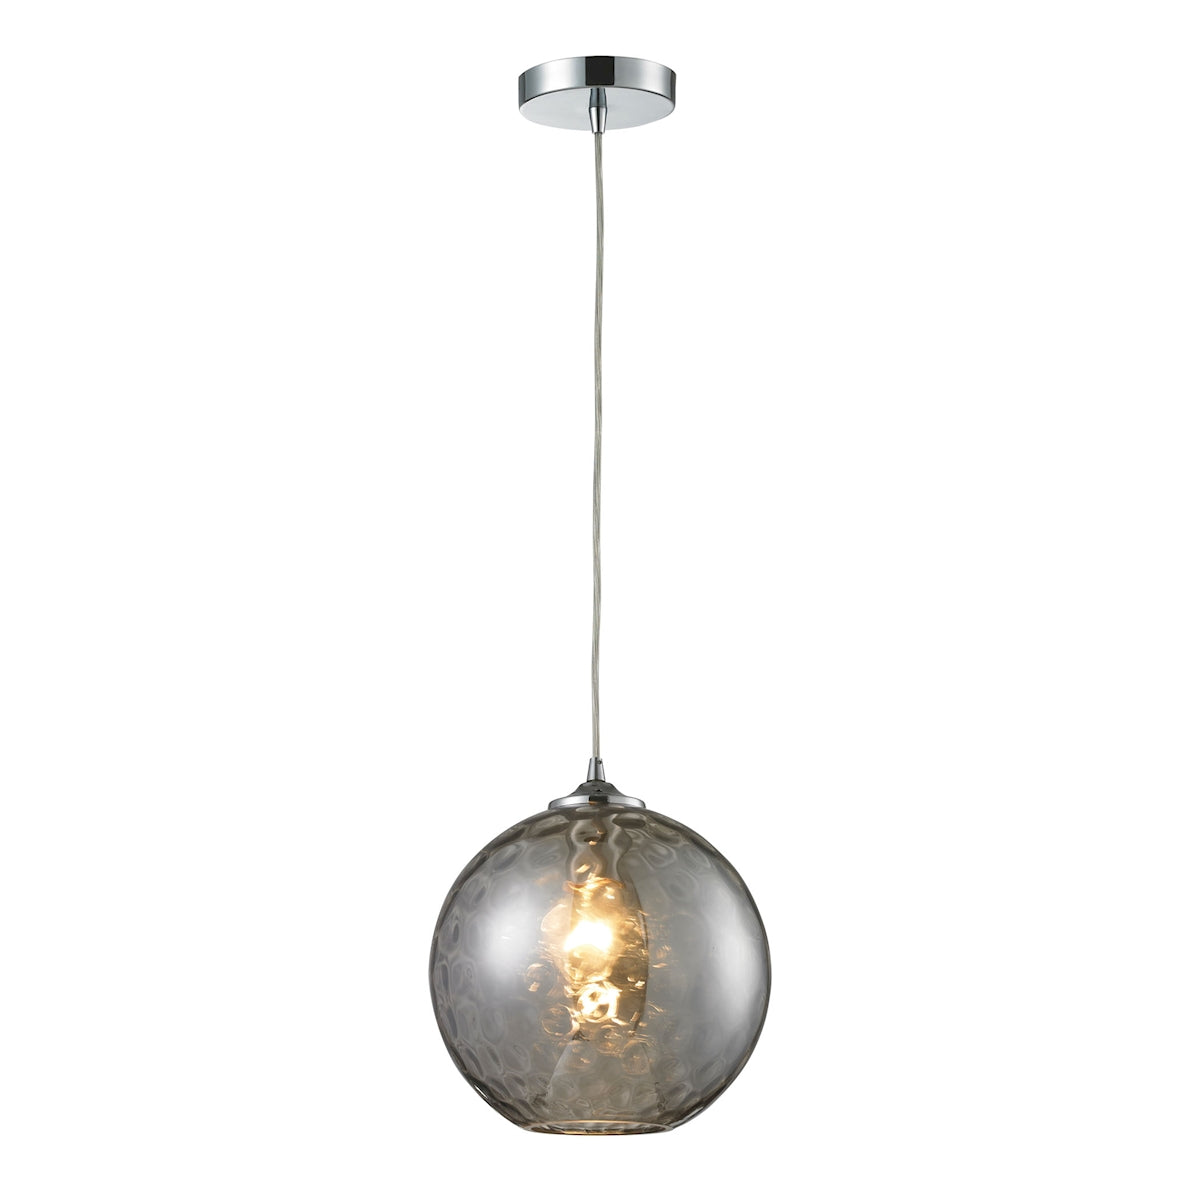 Watersphere 1-Light Mini Pendant in Chrome with Hammered Smoke Glass